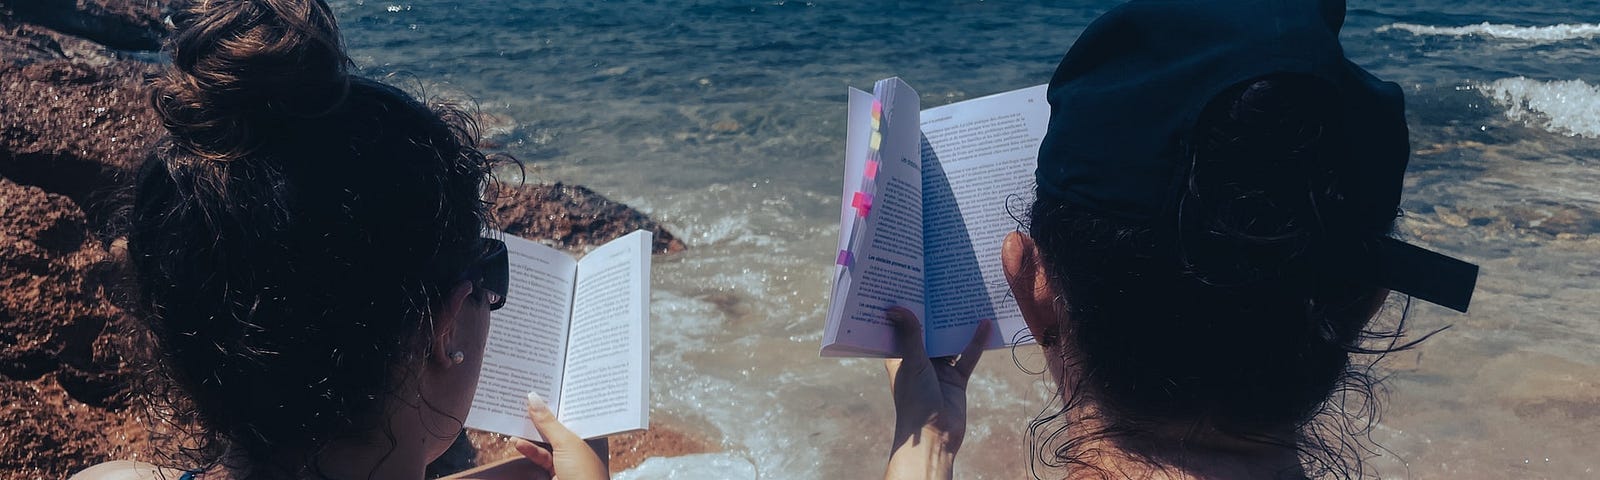 checklist two girls reading on beach in swimsuits holding books up can see water and sand its a clear day